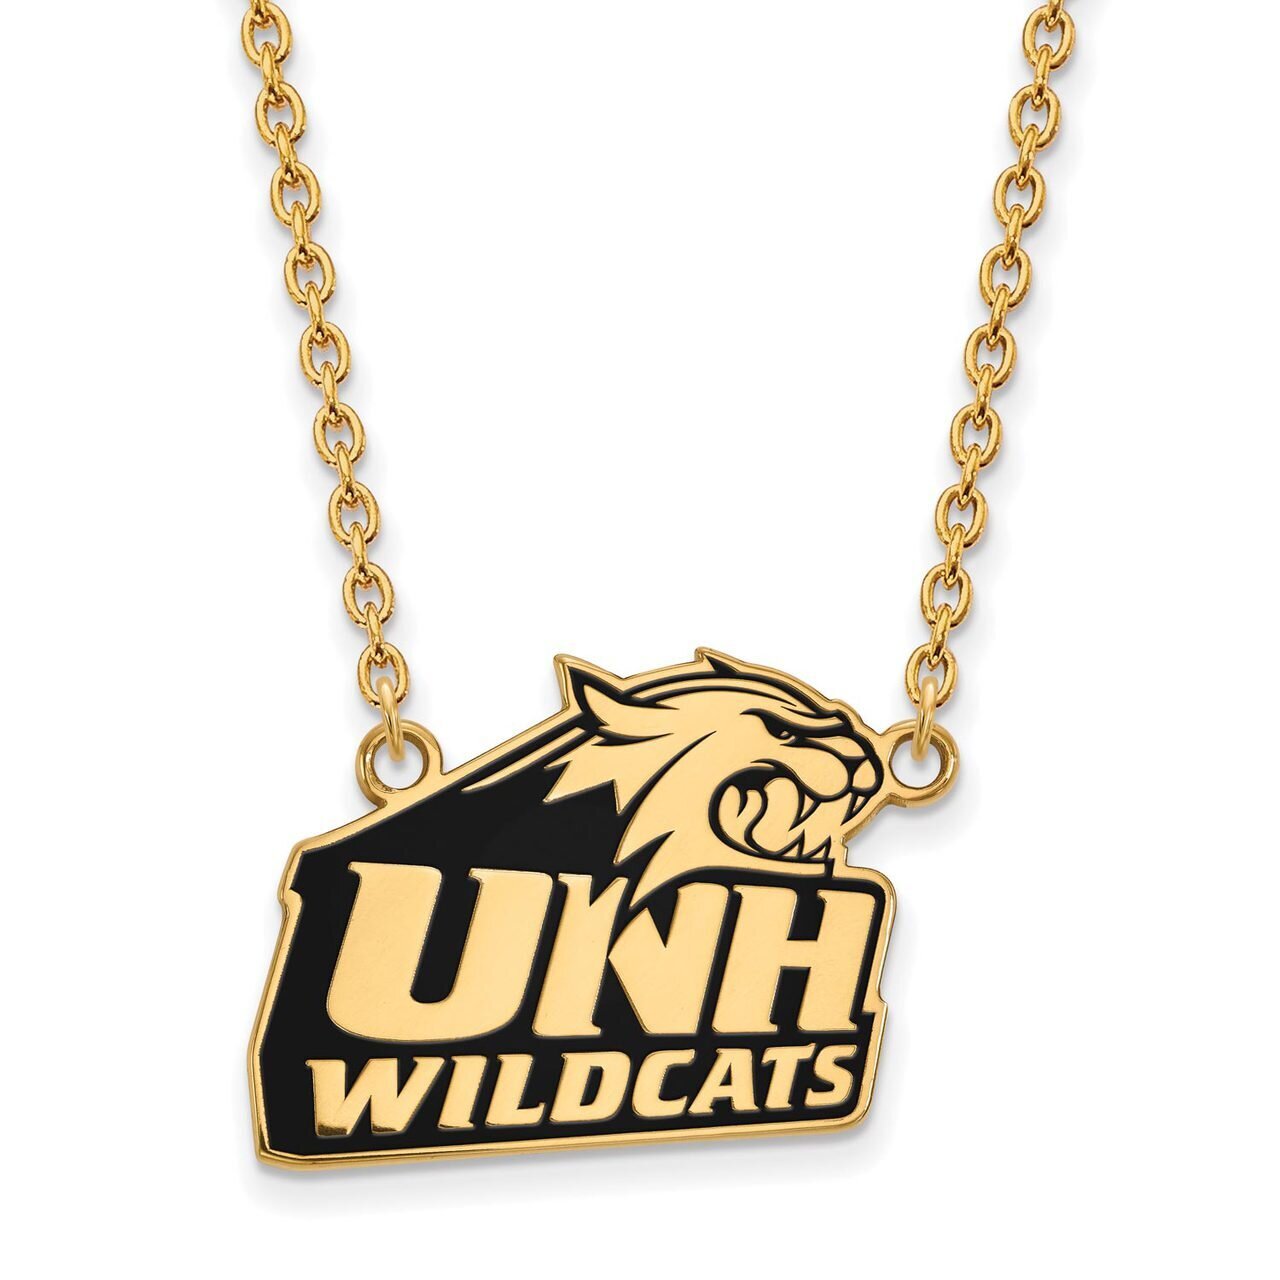 University of New Hampshire Large Enamel Pendant with Chain Necklace Gold-plated Silver GP015UNH-18